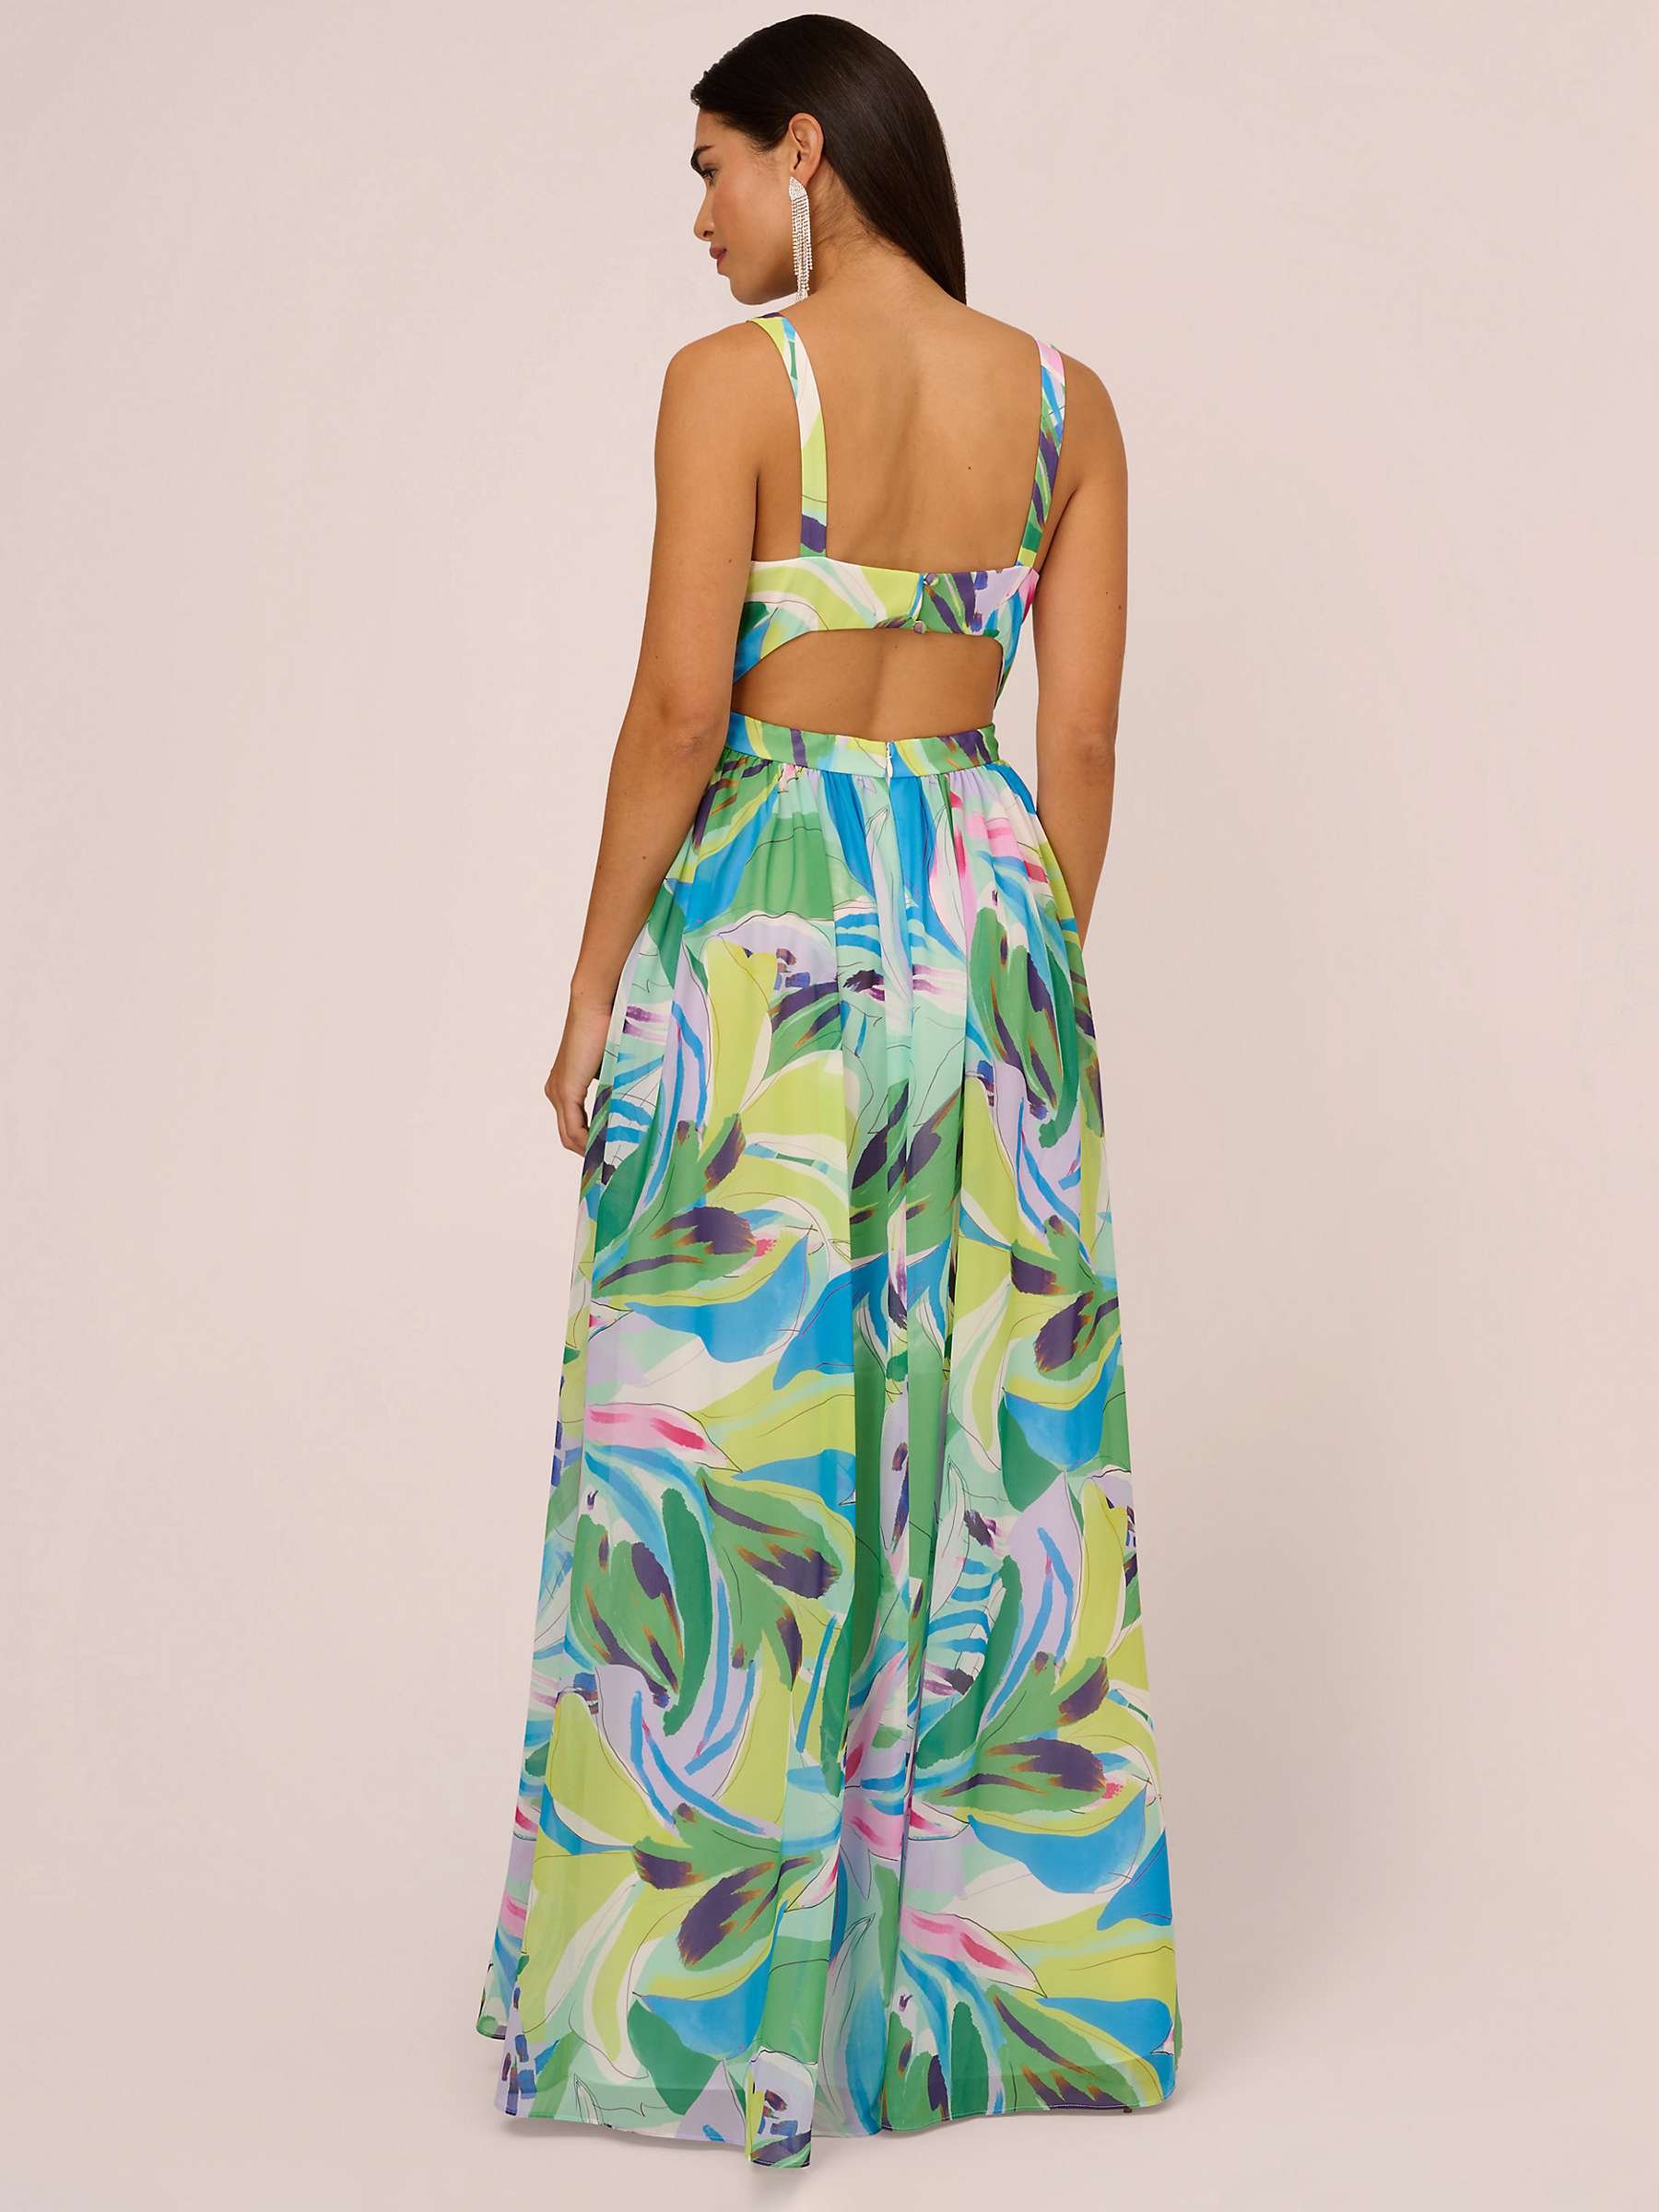 Buy Aidan by Adrianna Papell Floral Chiffon Maxi Dress, Green/Multi Online at johnlewis.com